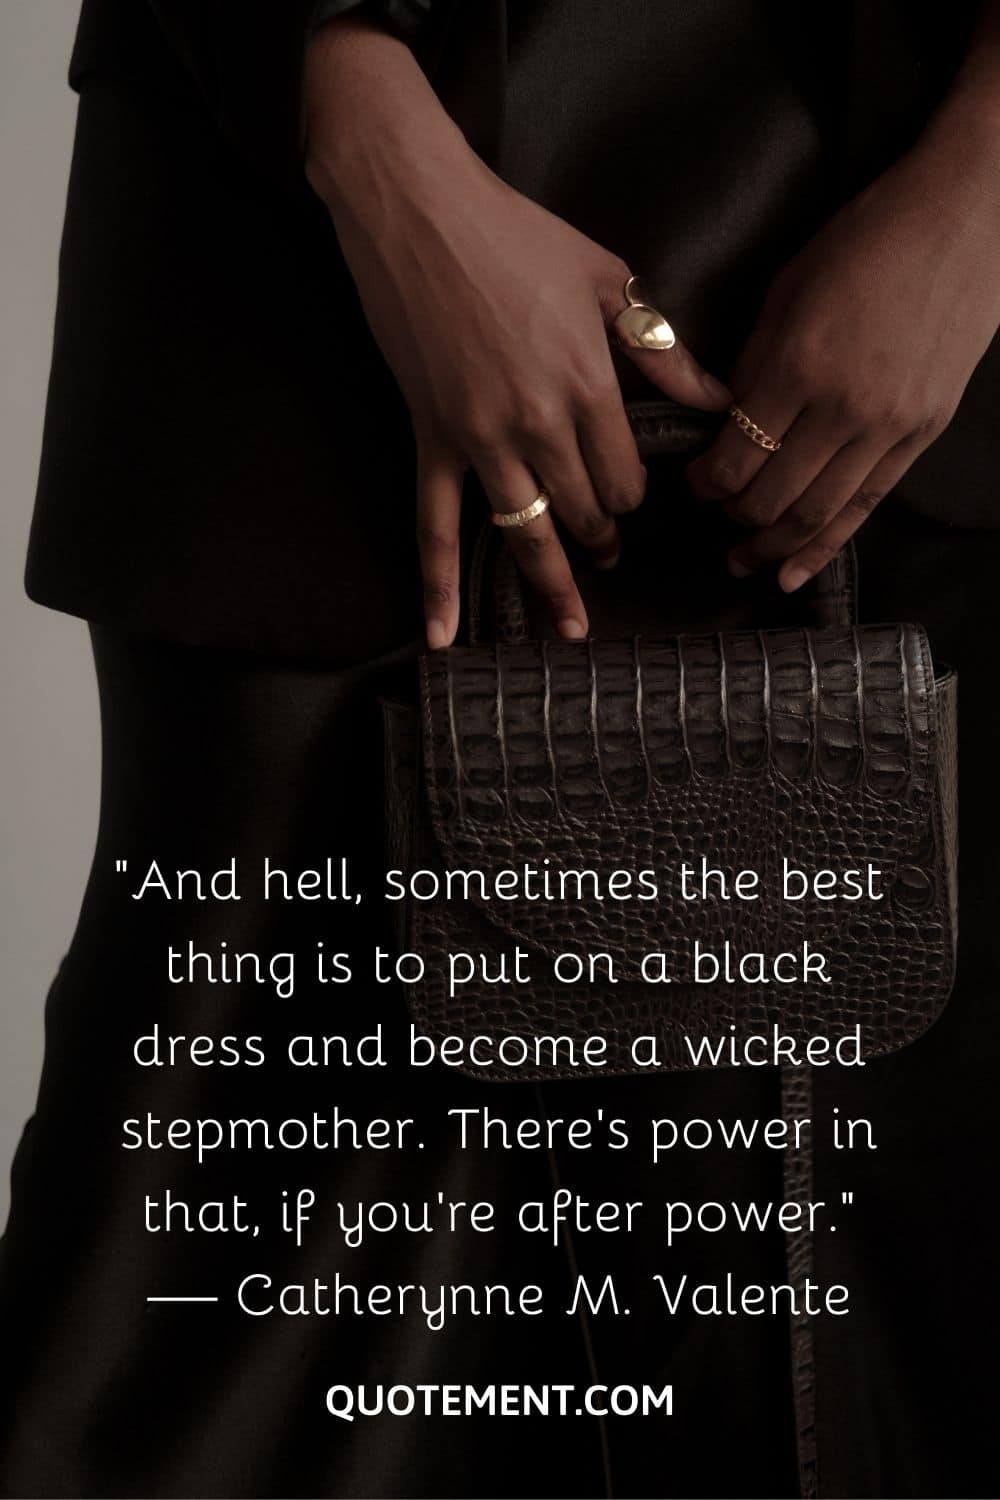 sometimes the best thing is to put on a black dress and become a wicked stepmother